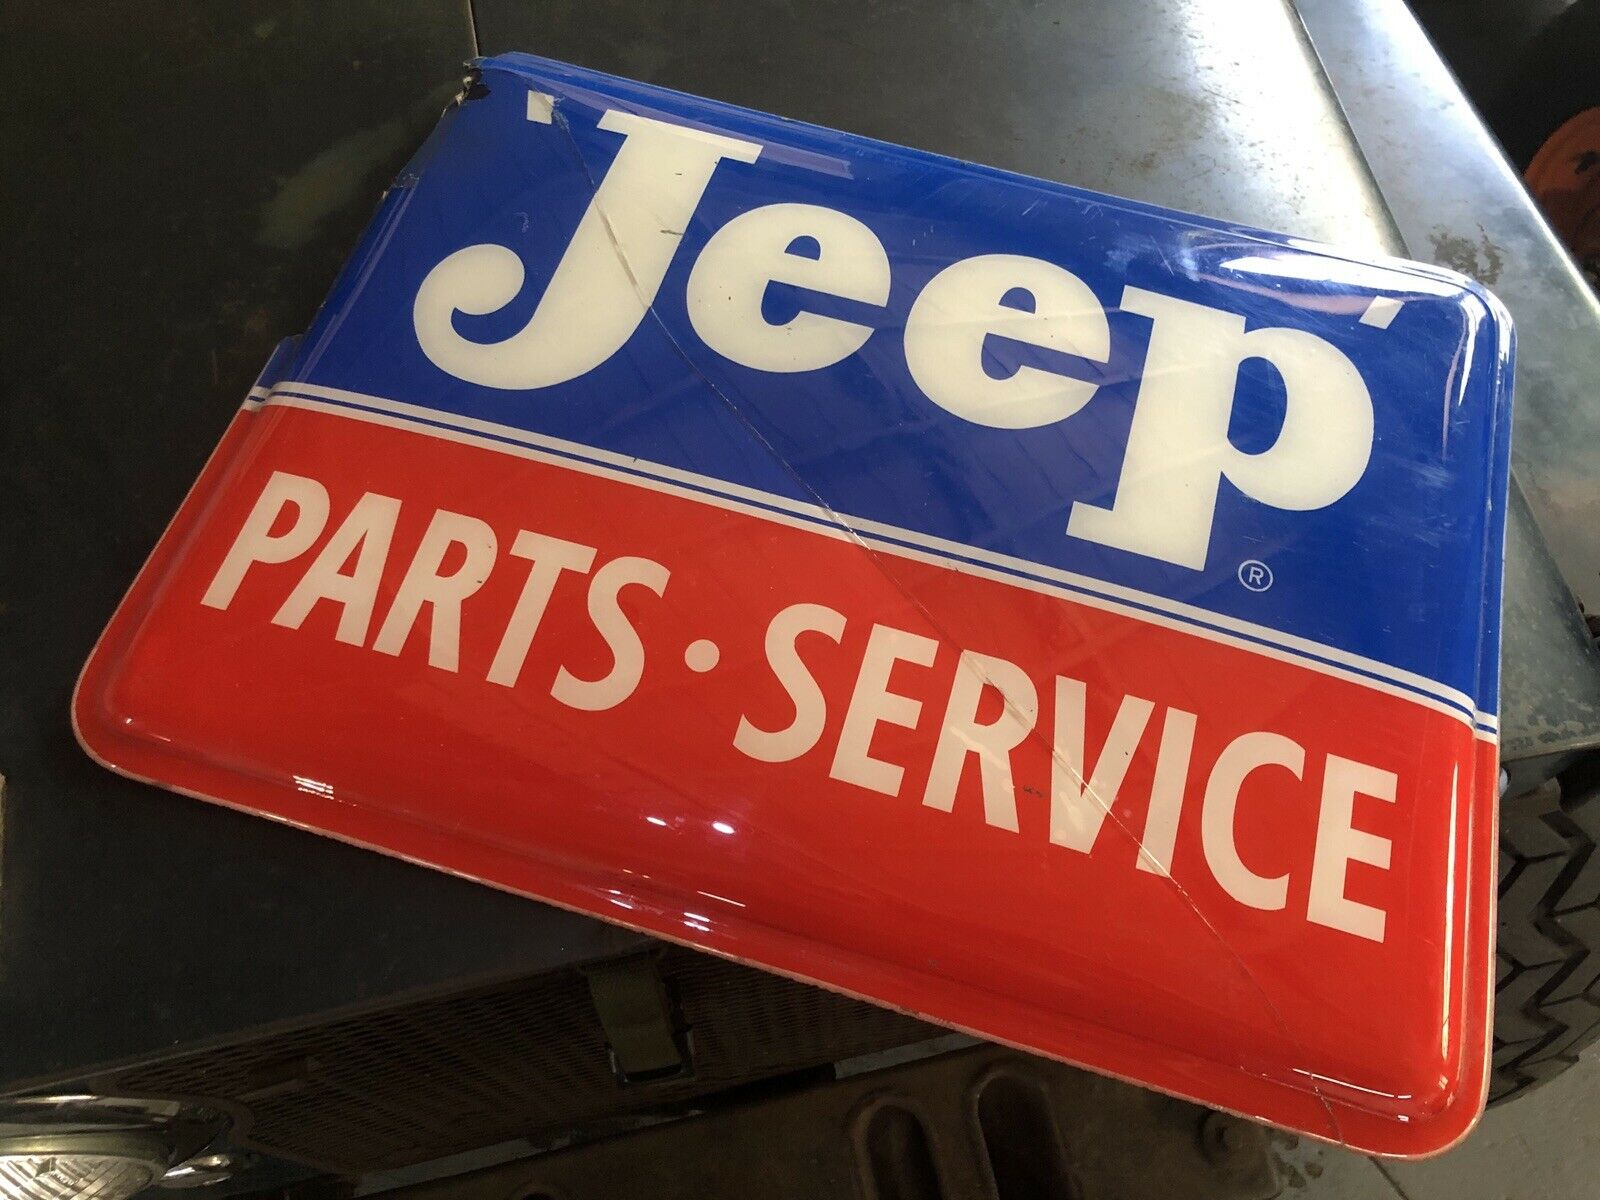 ‘Jeep’ Parts • Service Sign on eBay eWillys